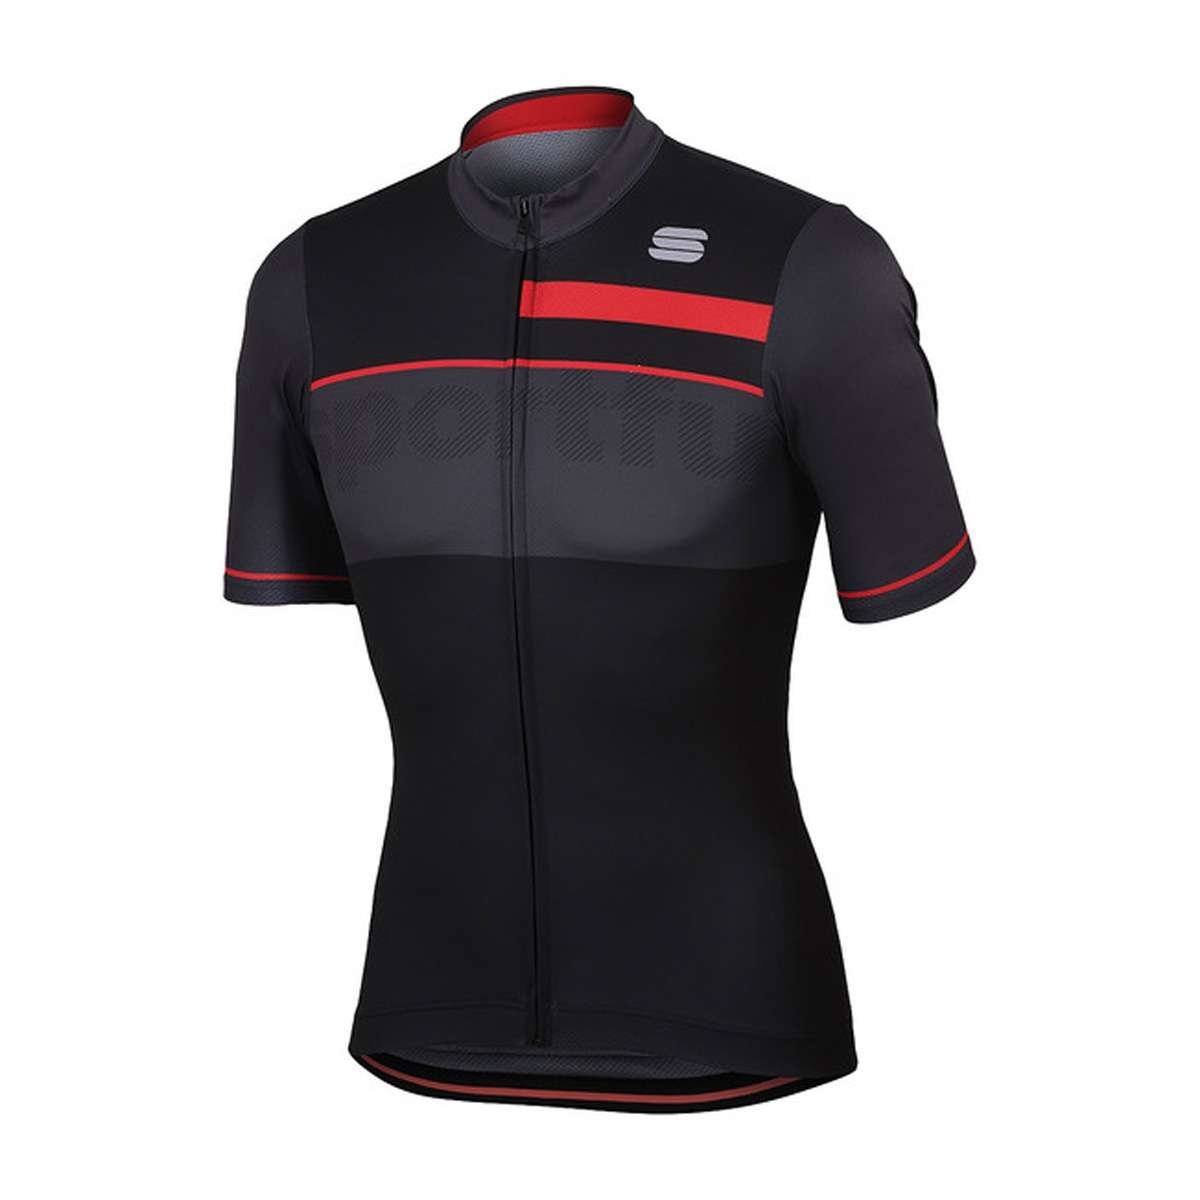 Sportful Squadra Corse Short Sleeve Jersey - Black/Anthracite Red - Cyclop.in